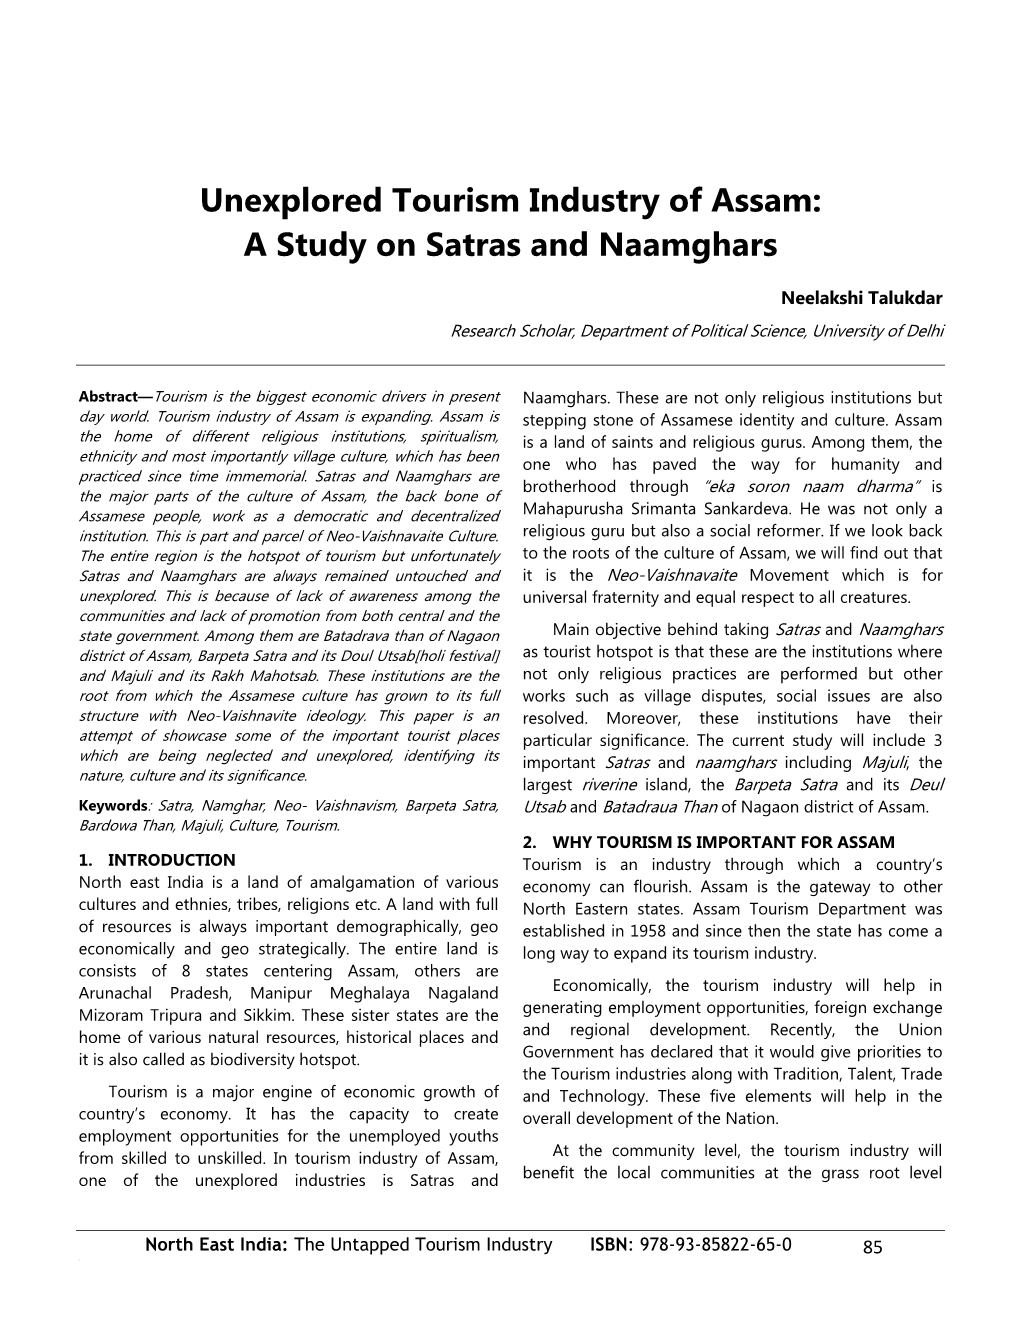 Unexplored Tourism Industry of Assam: a Study on Satras and Naamghars